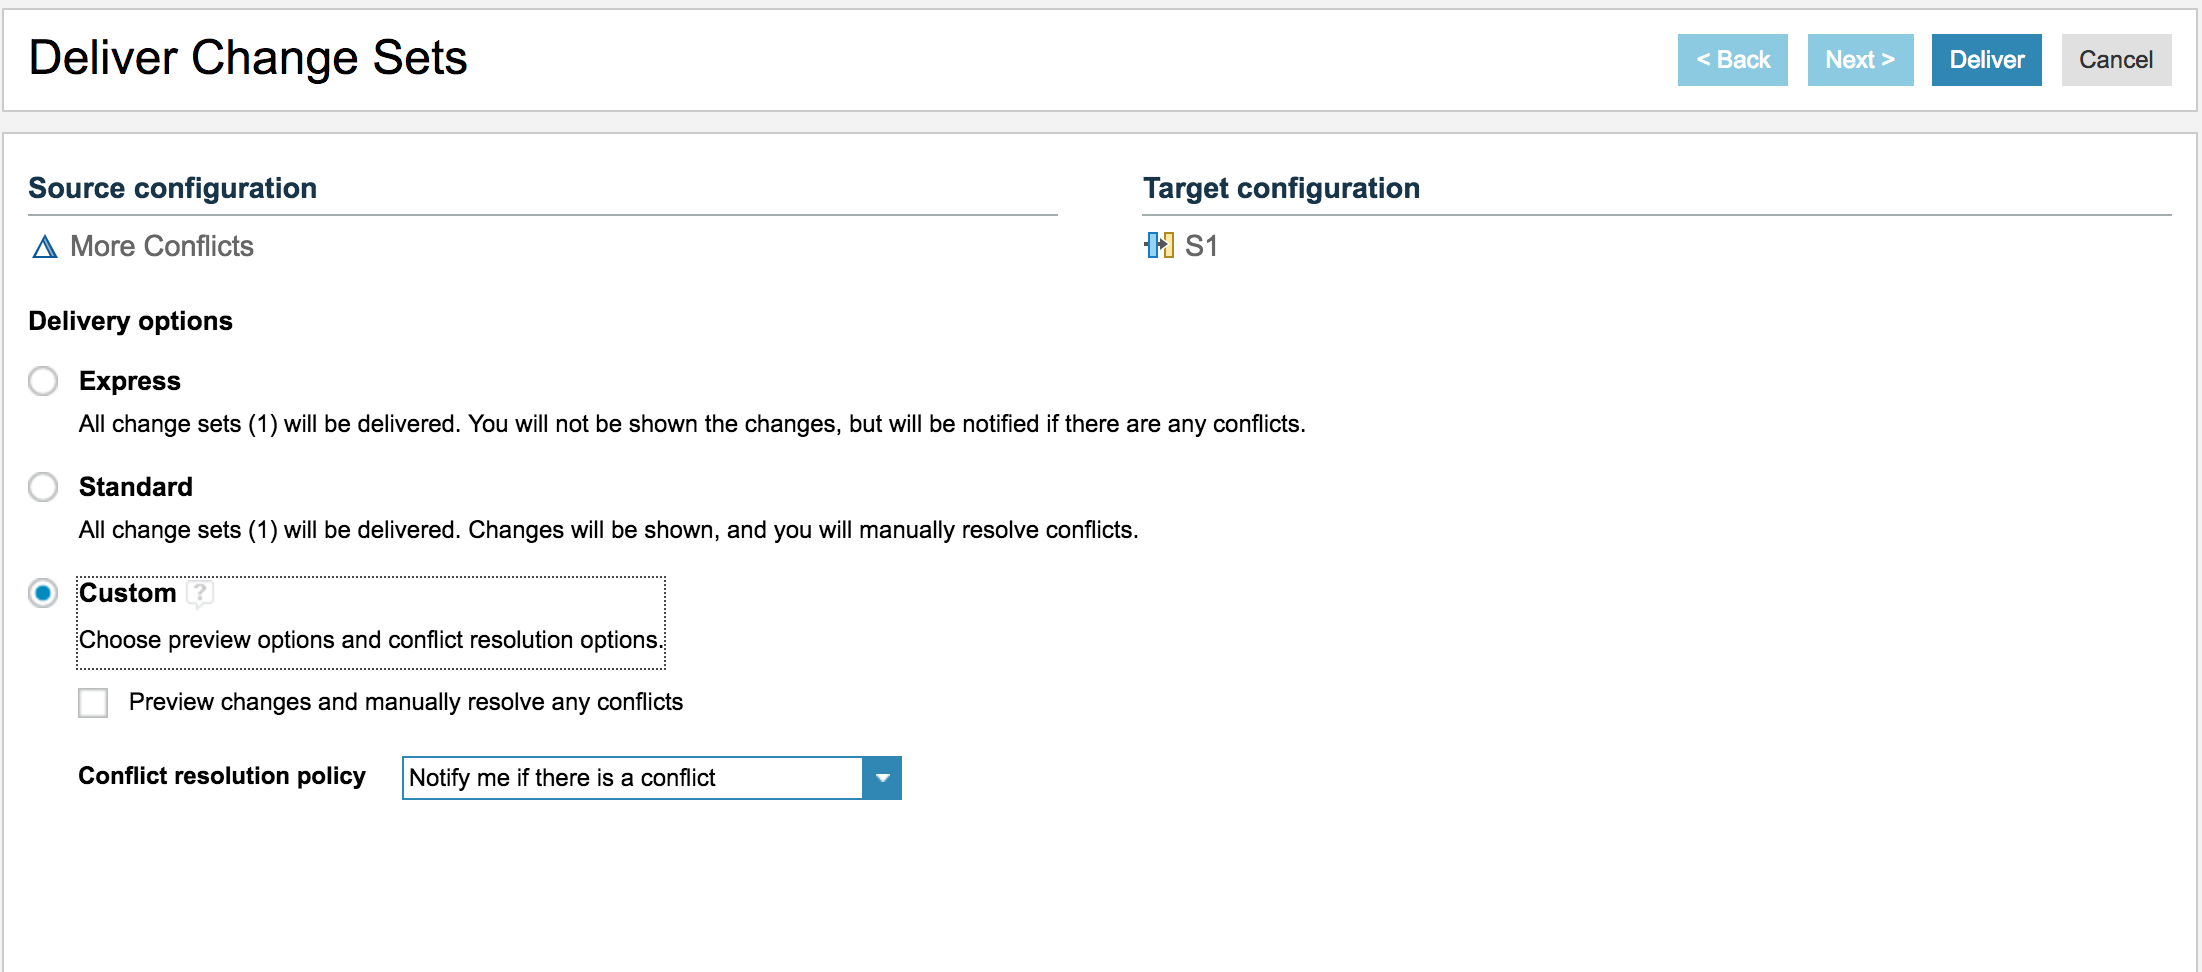 Source configuration options in the Deliver change sets dialog box